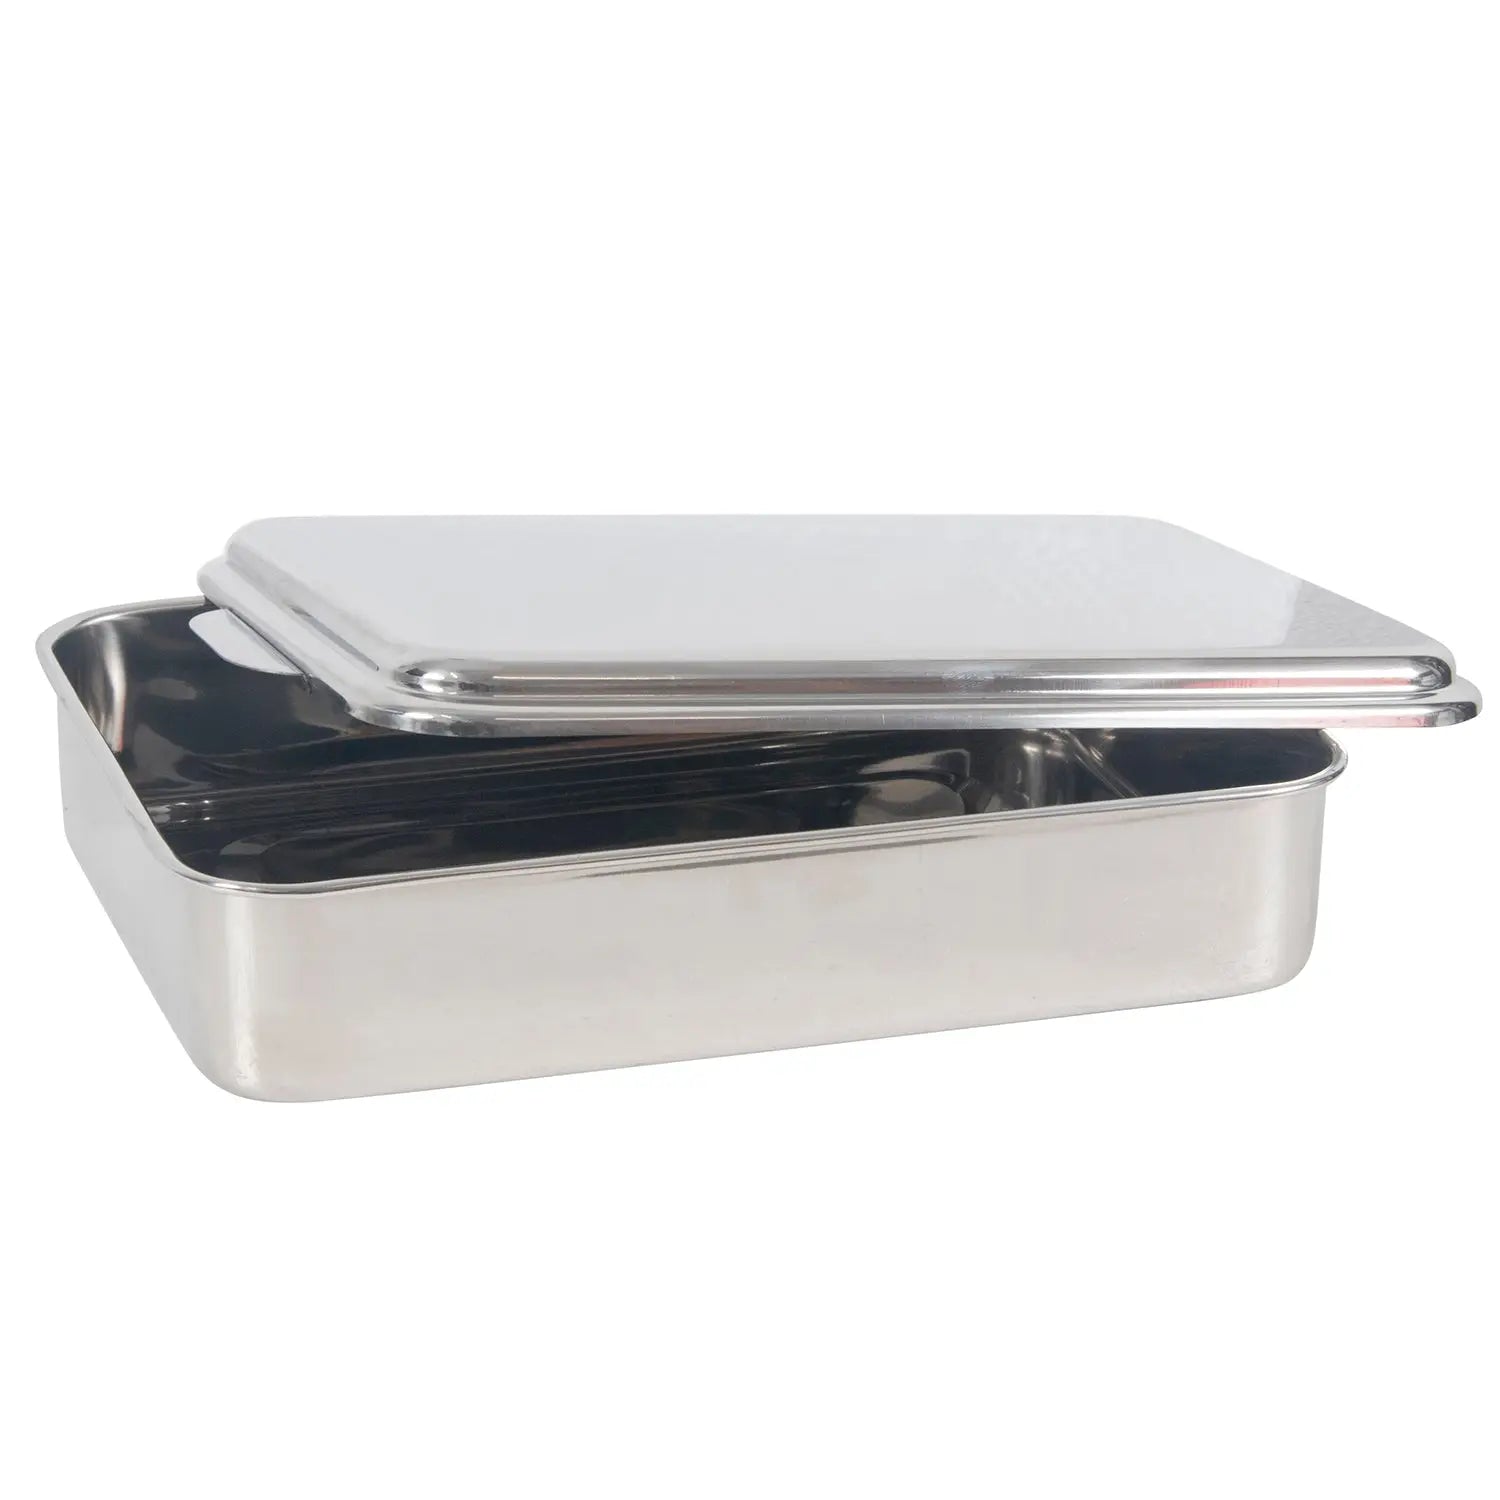 Stainless Steel Covered Cake Pan : Homesteader's Supply